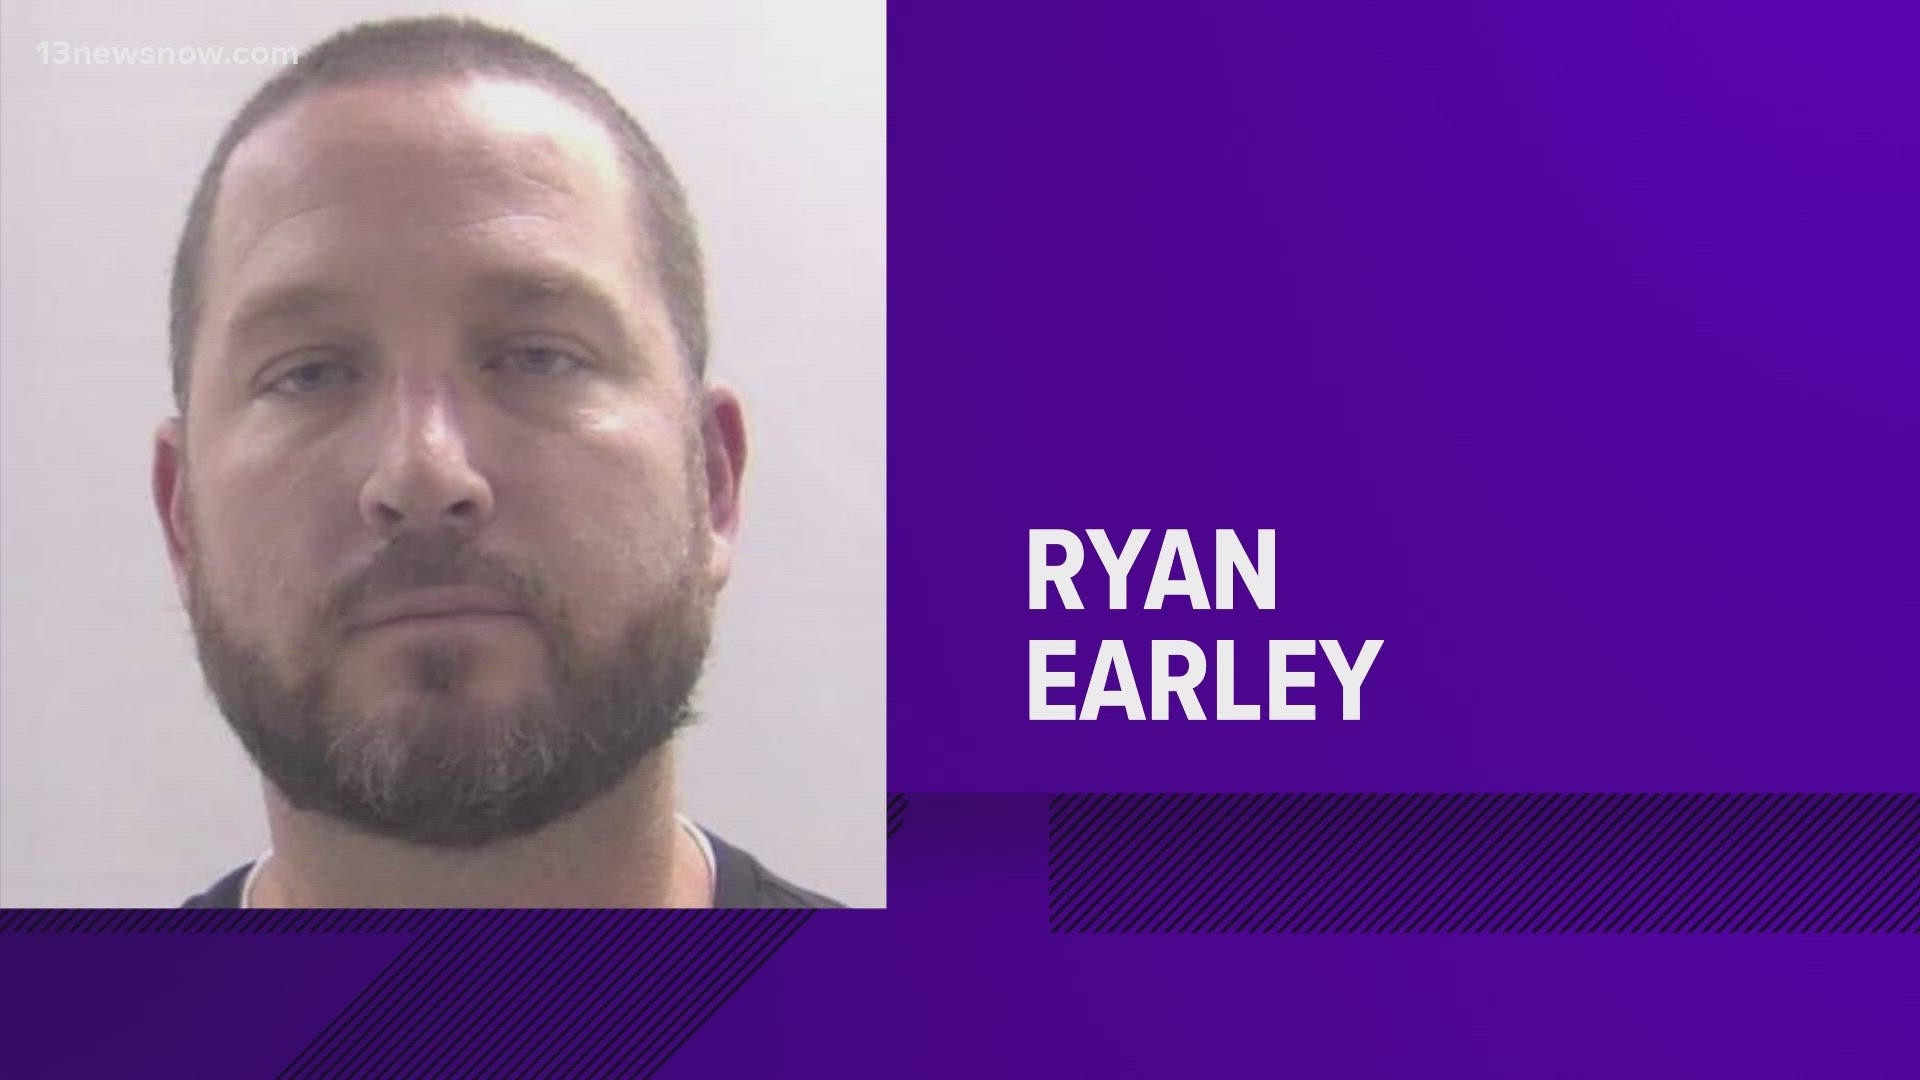 Court records show that Ryan Earley pleaded guilty more than a decade ago to taking indecent liberties with a child.